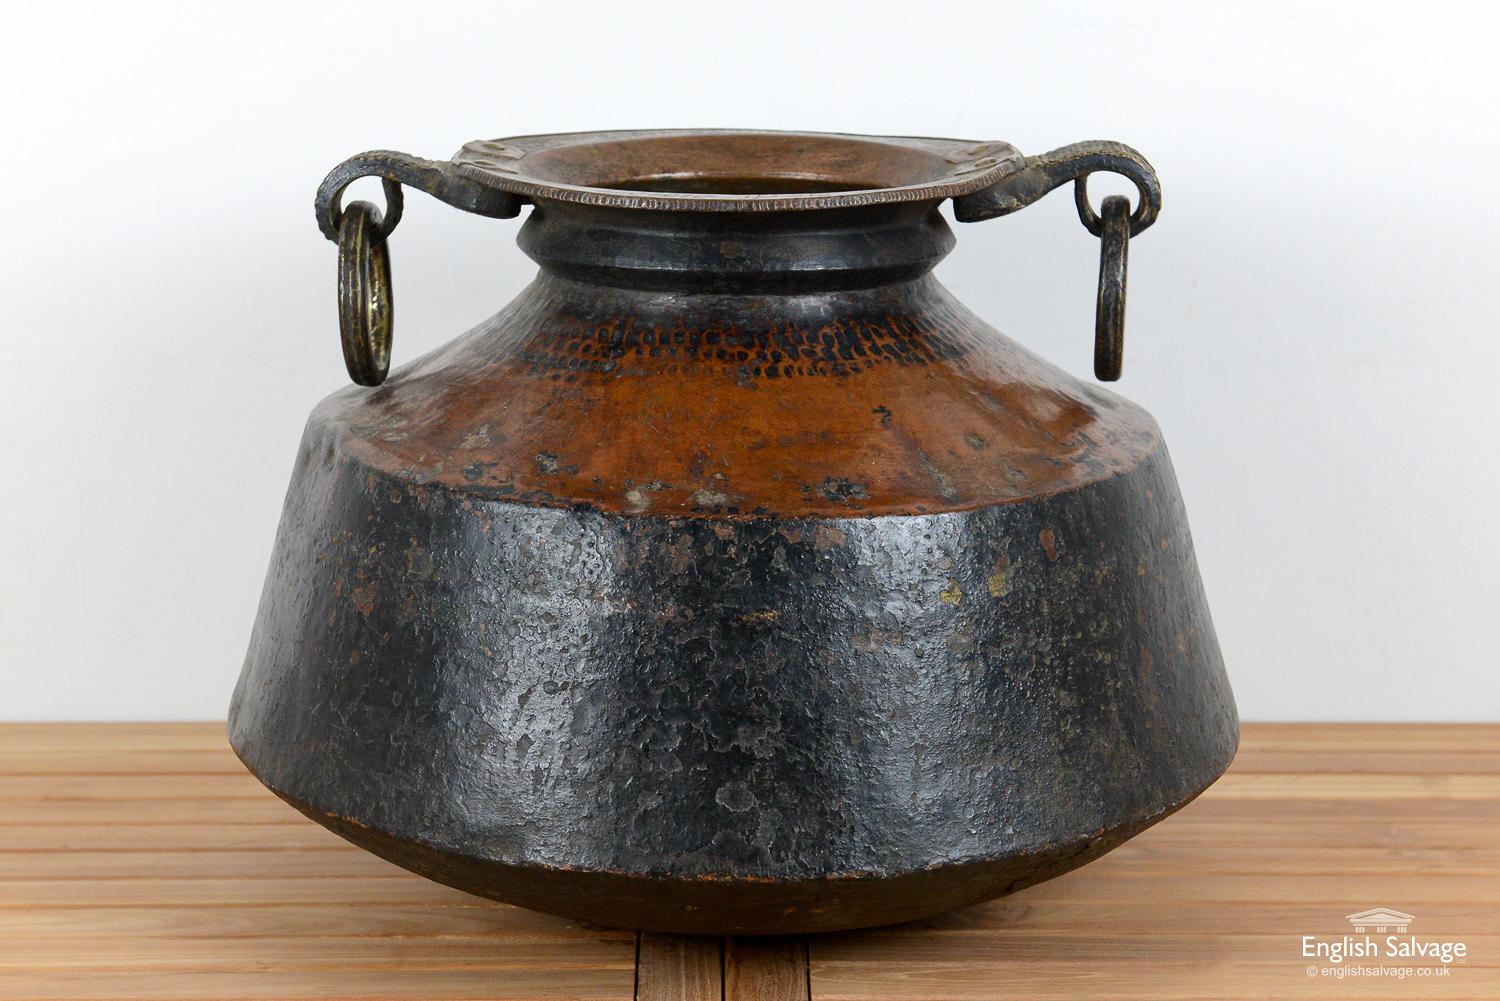 Large hammered copper pot with two ring handles and a patinated finish. The pot was reclaimed from India and is in a solid condition with some knocks from past use.